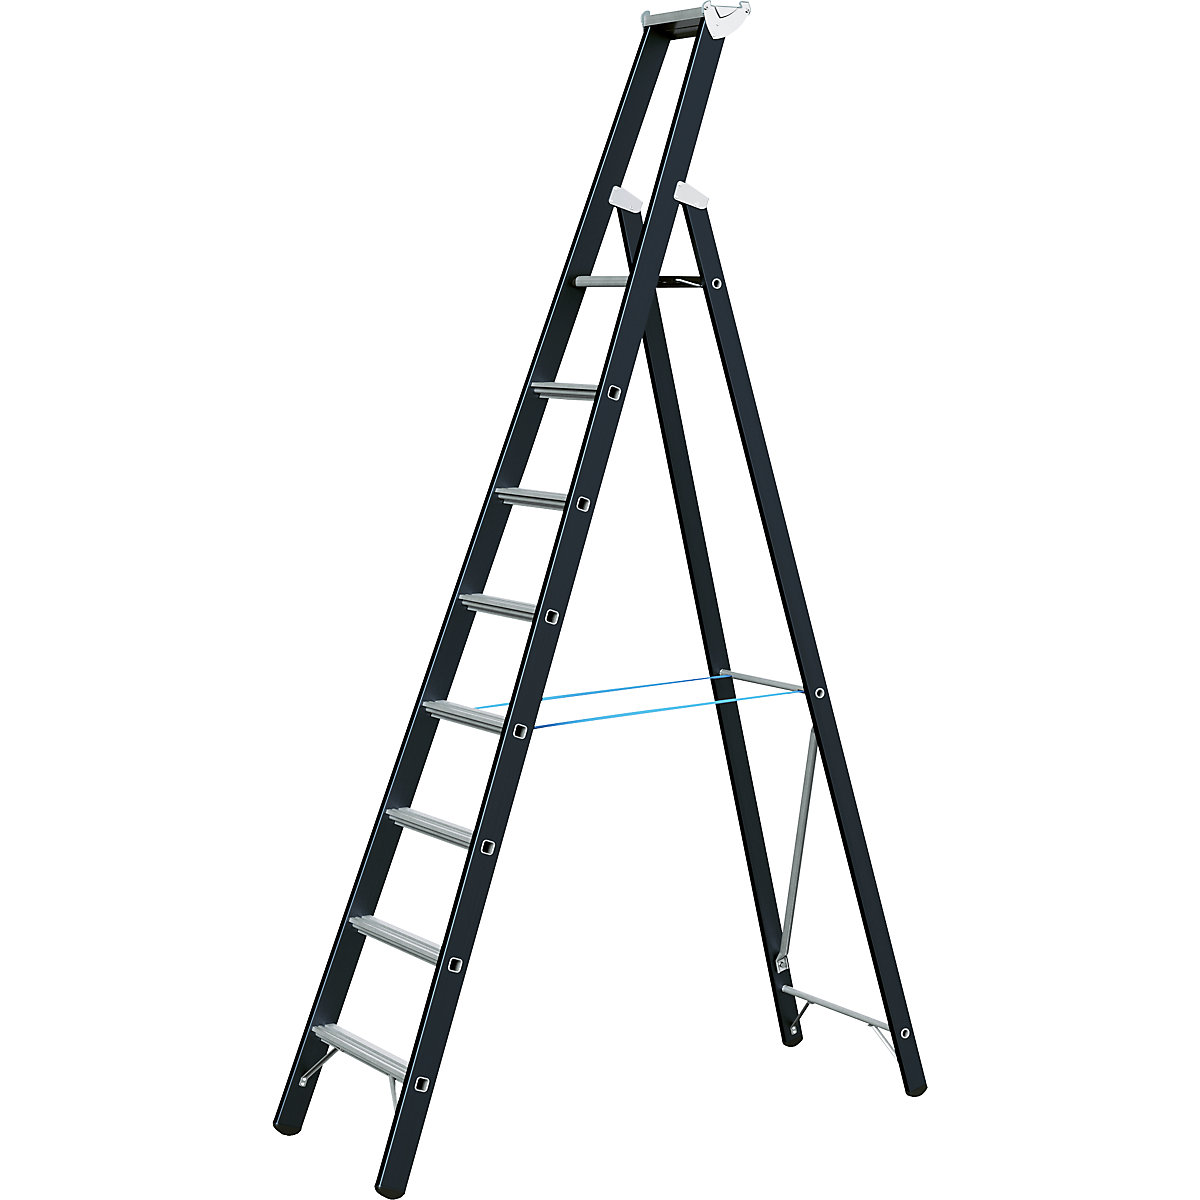 Heavy duty step ladder – ZARGES, single sided, 8 rungs incl. platform-4